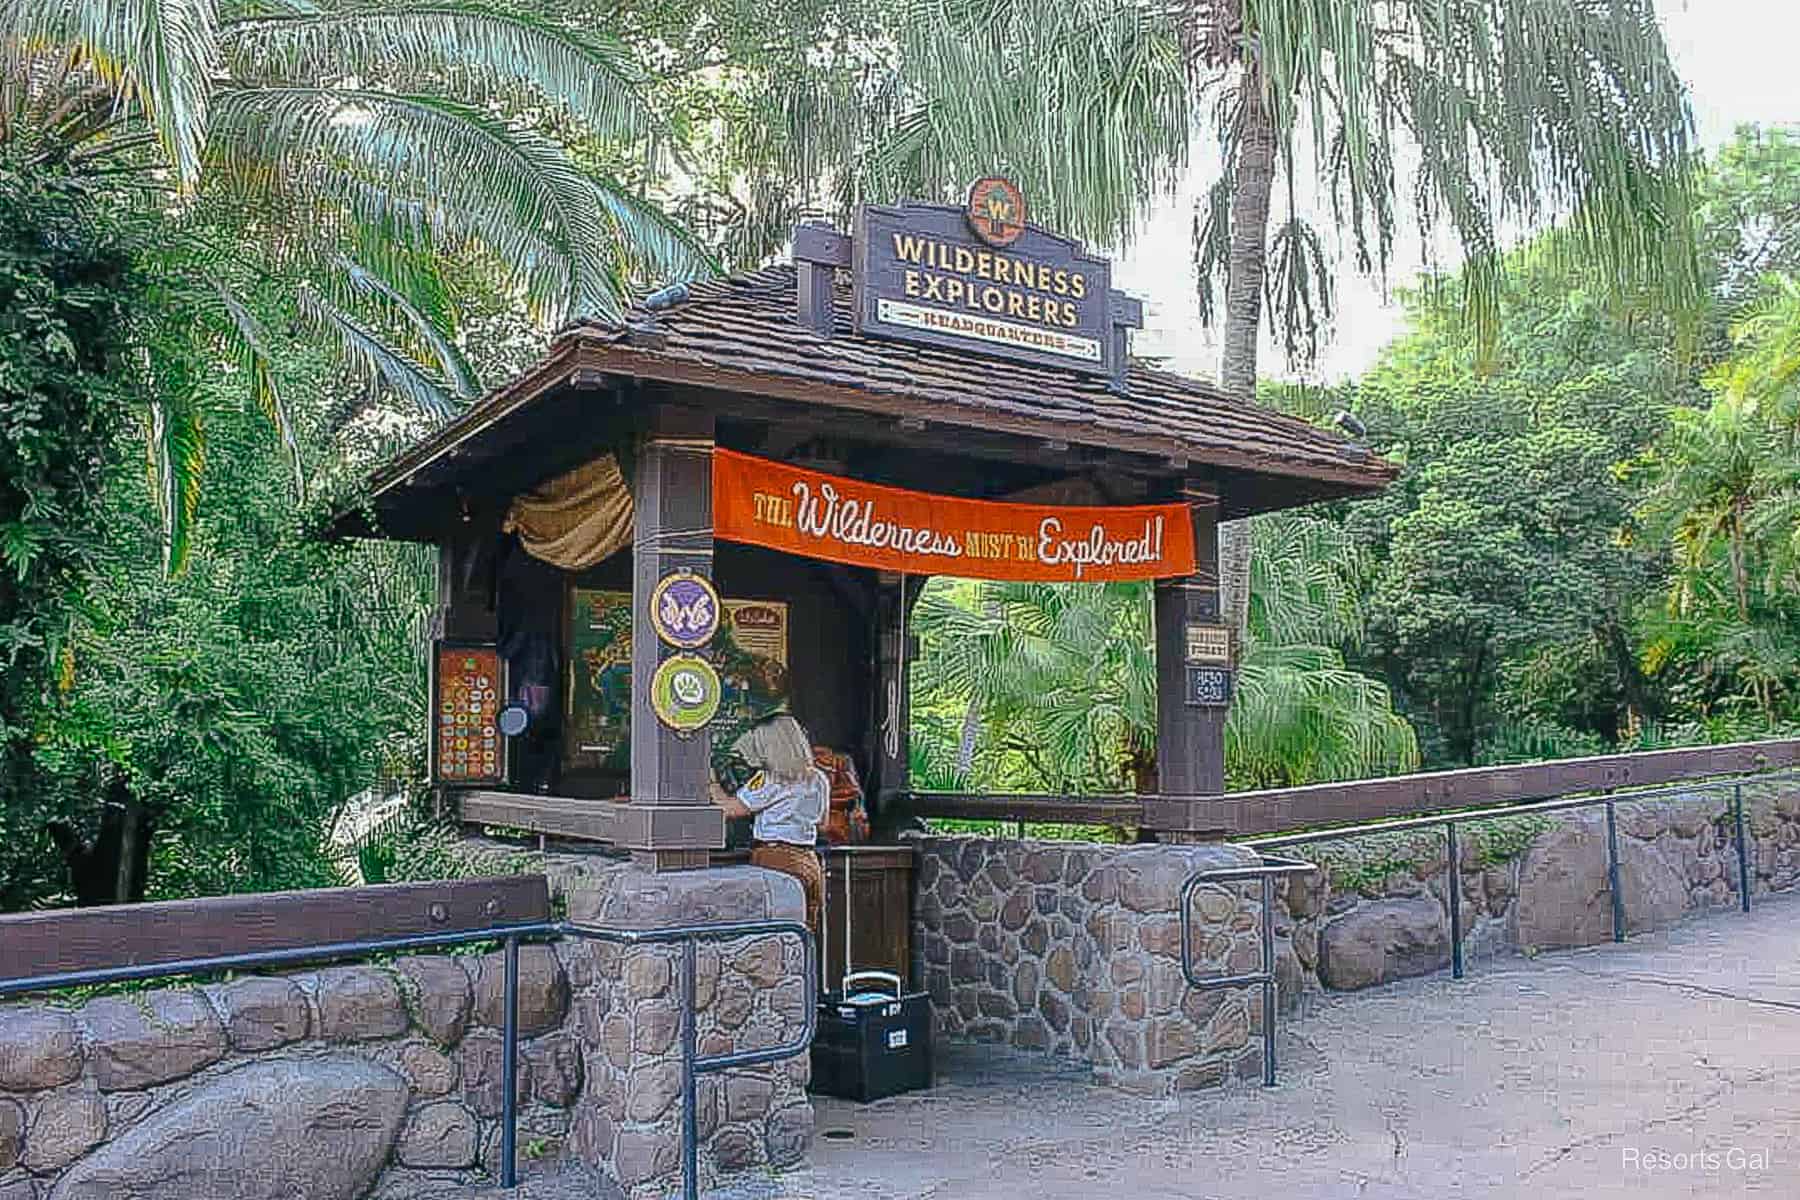 The first stop on the Wilderness Explorers at Animal Kingdom.